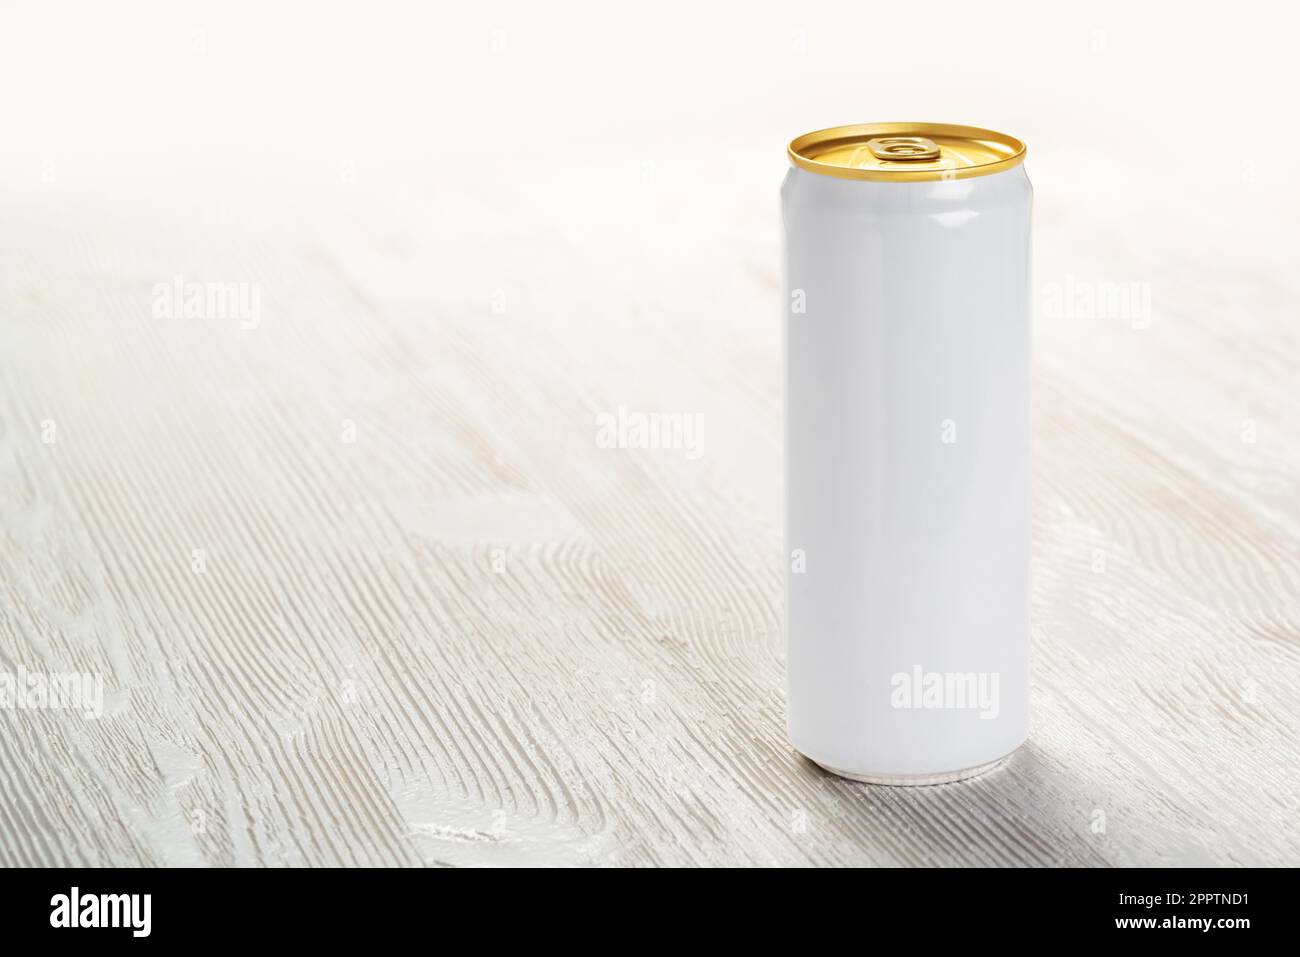 Aluminum 330 ml slim can on the white wood table. Mock-up for design drink, beer, soda, juice, water or alcohol. Stock Photo